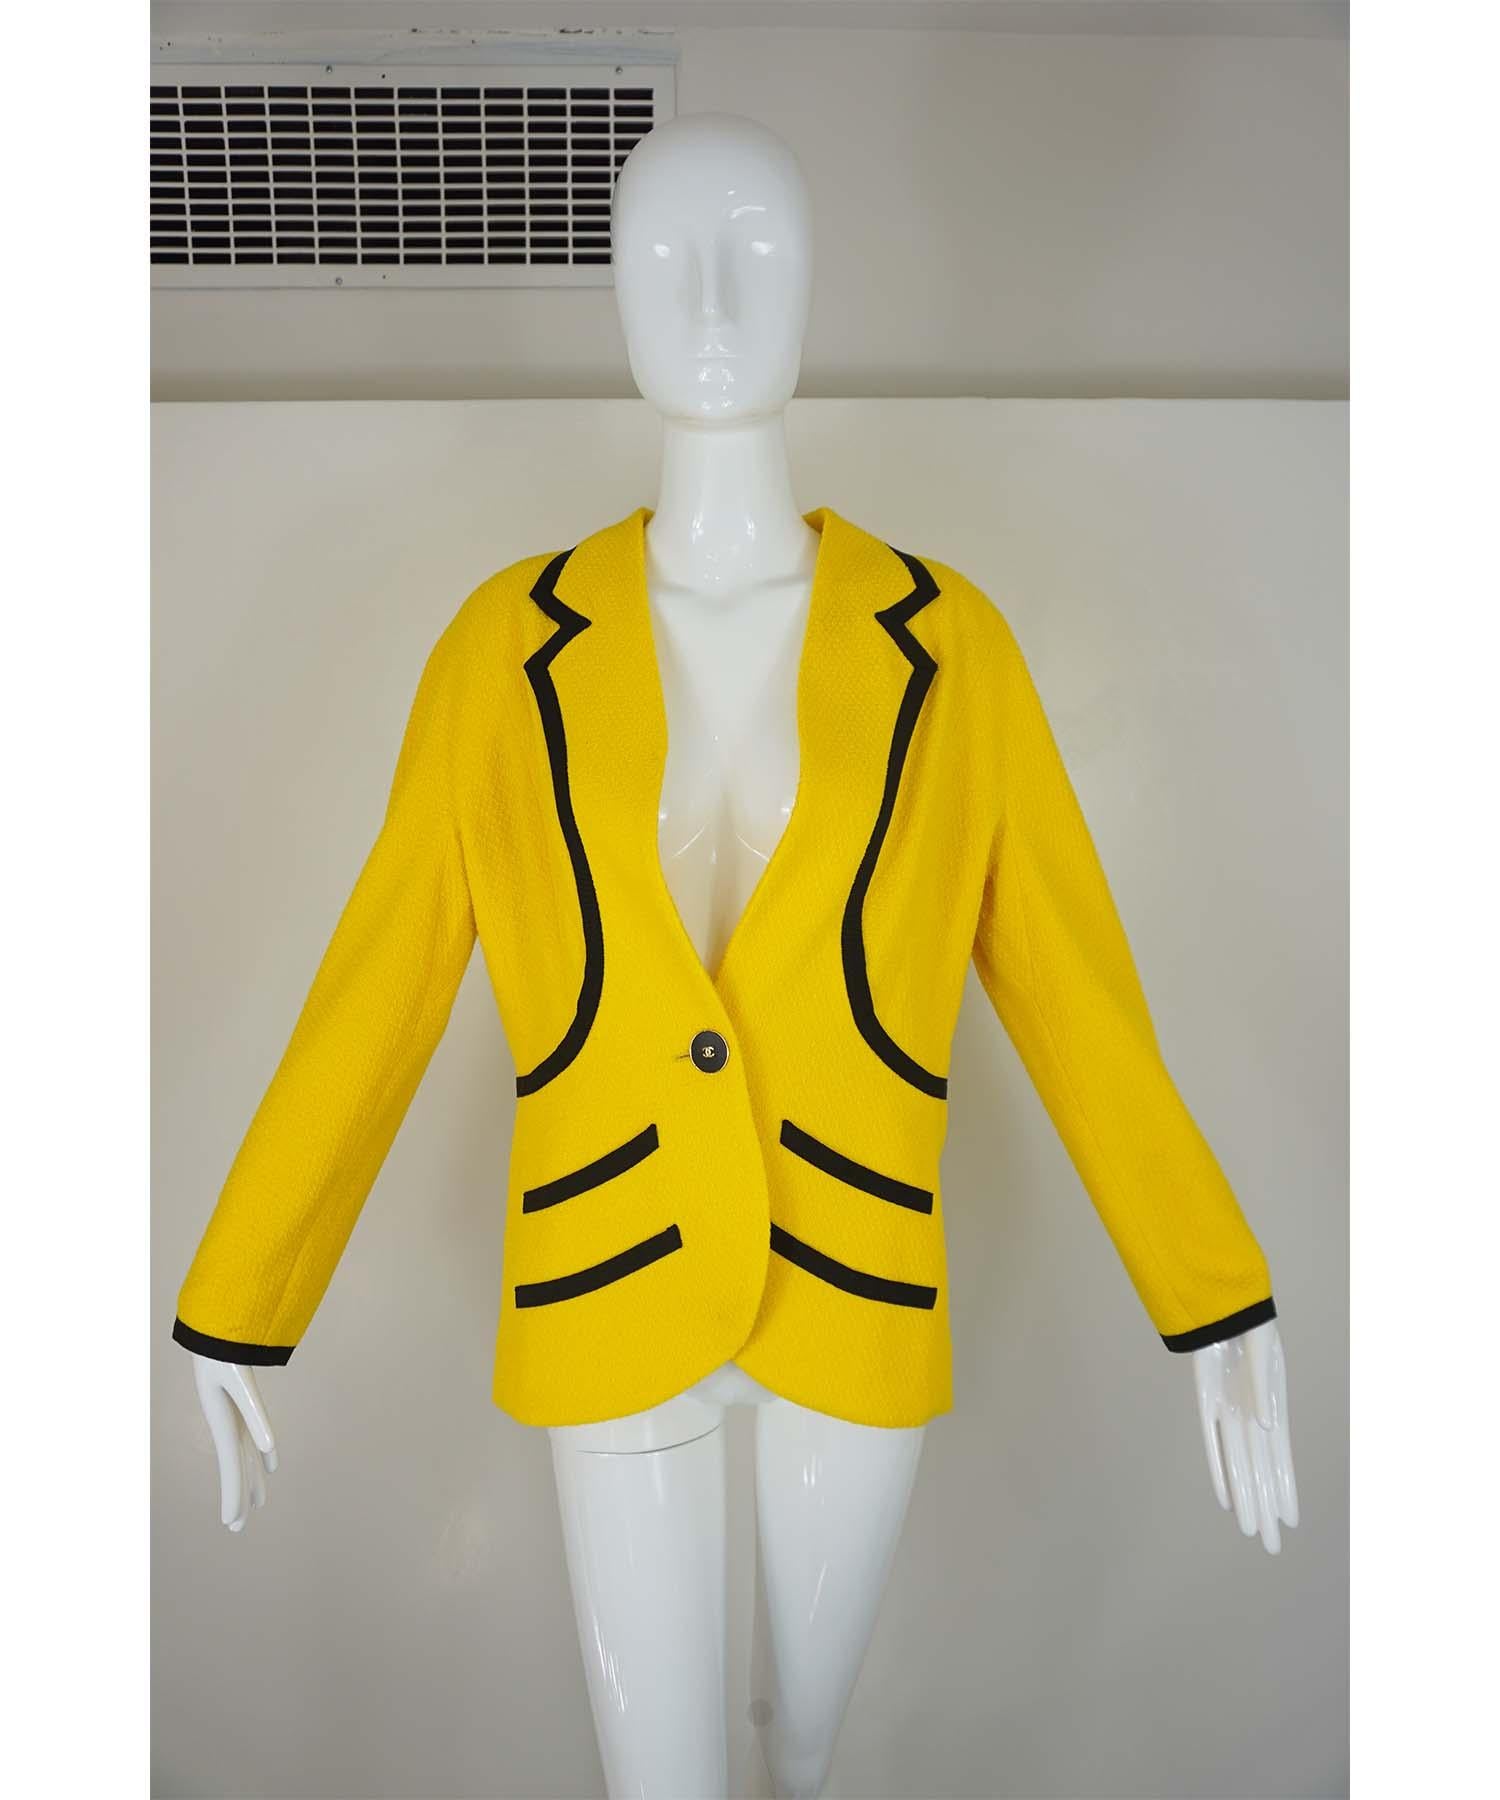 Chanel Boutique vintage jacket, from their 1993 Cruise Collection,  is featured in yellow wool with black ribbon trim and four front mock pockets.  The jacket is adorned with large black and gold CC button closure and three matching smaller black